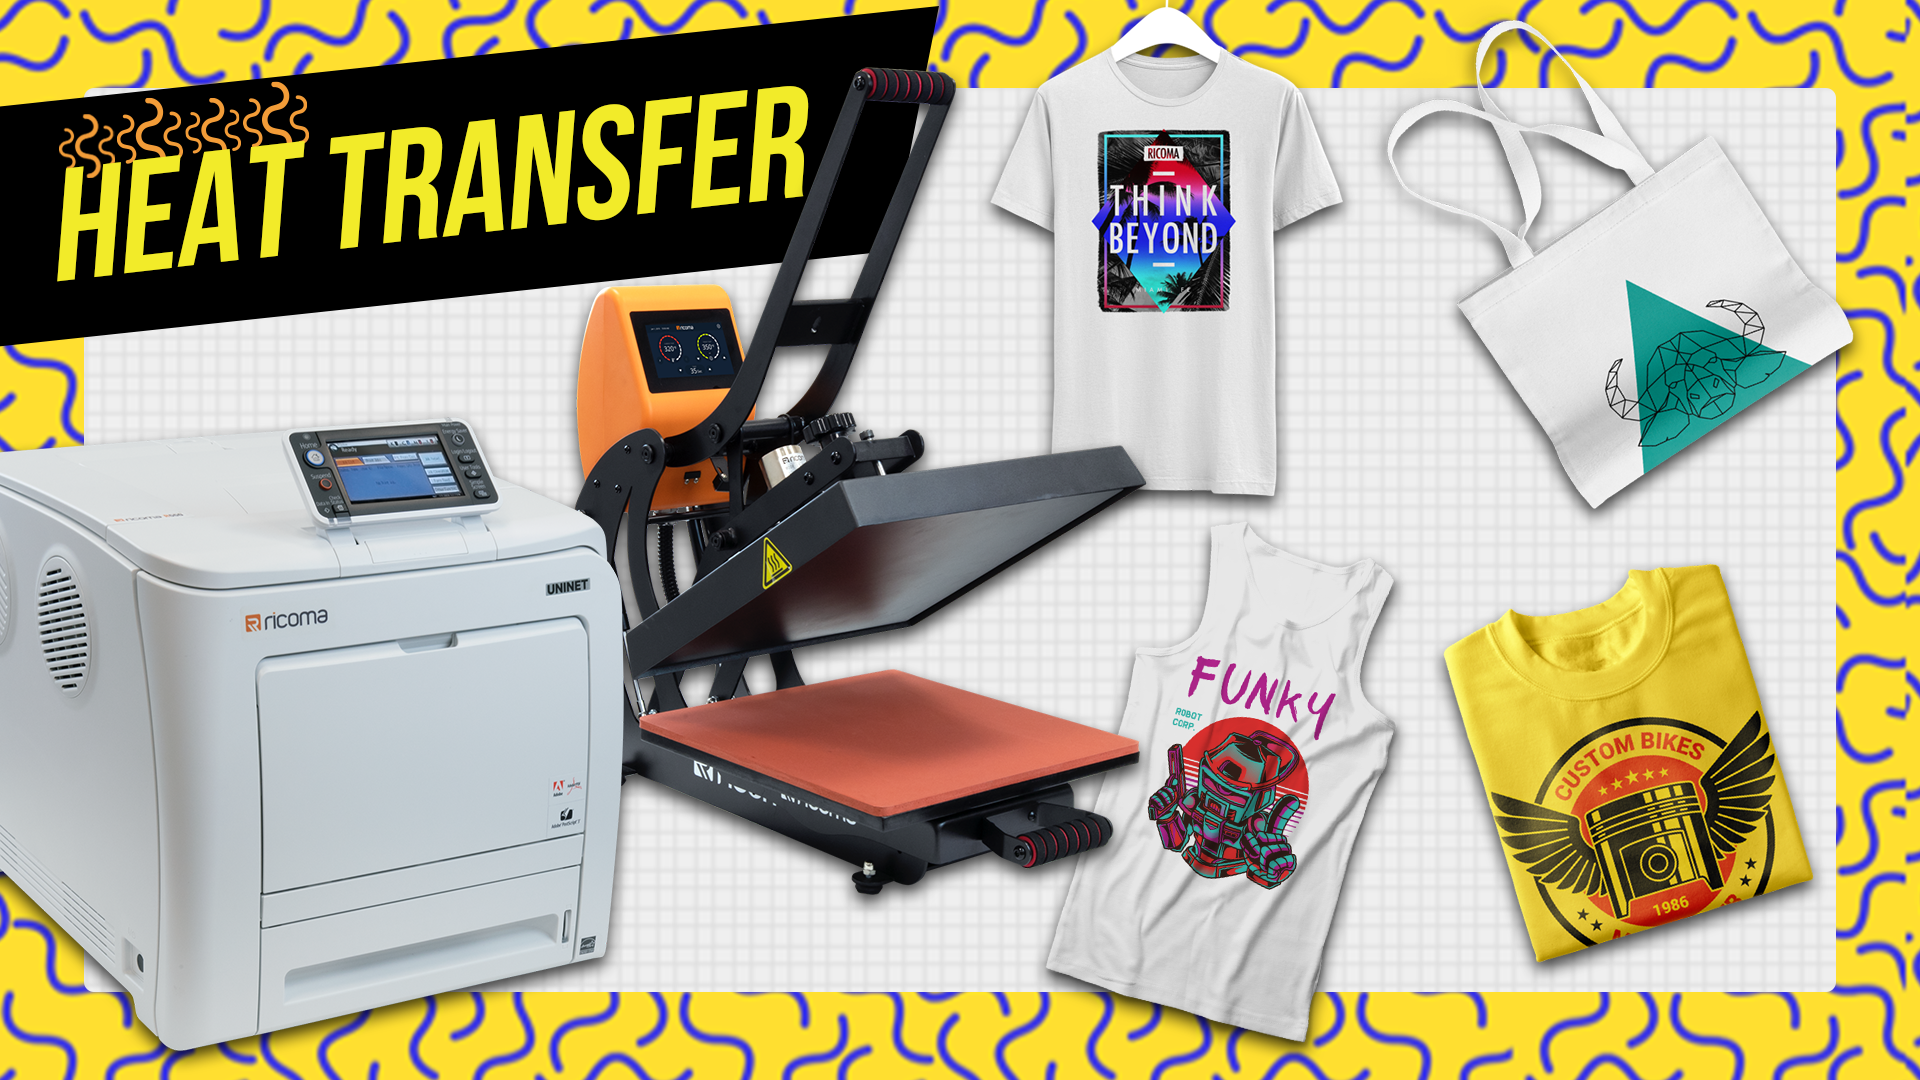 HEAT PRESS PRINTING AT HOME: Start your t-shirt business at home